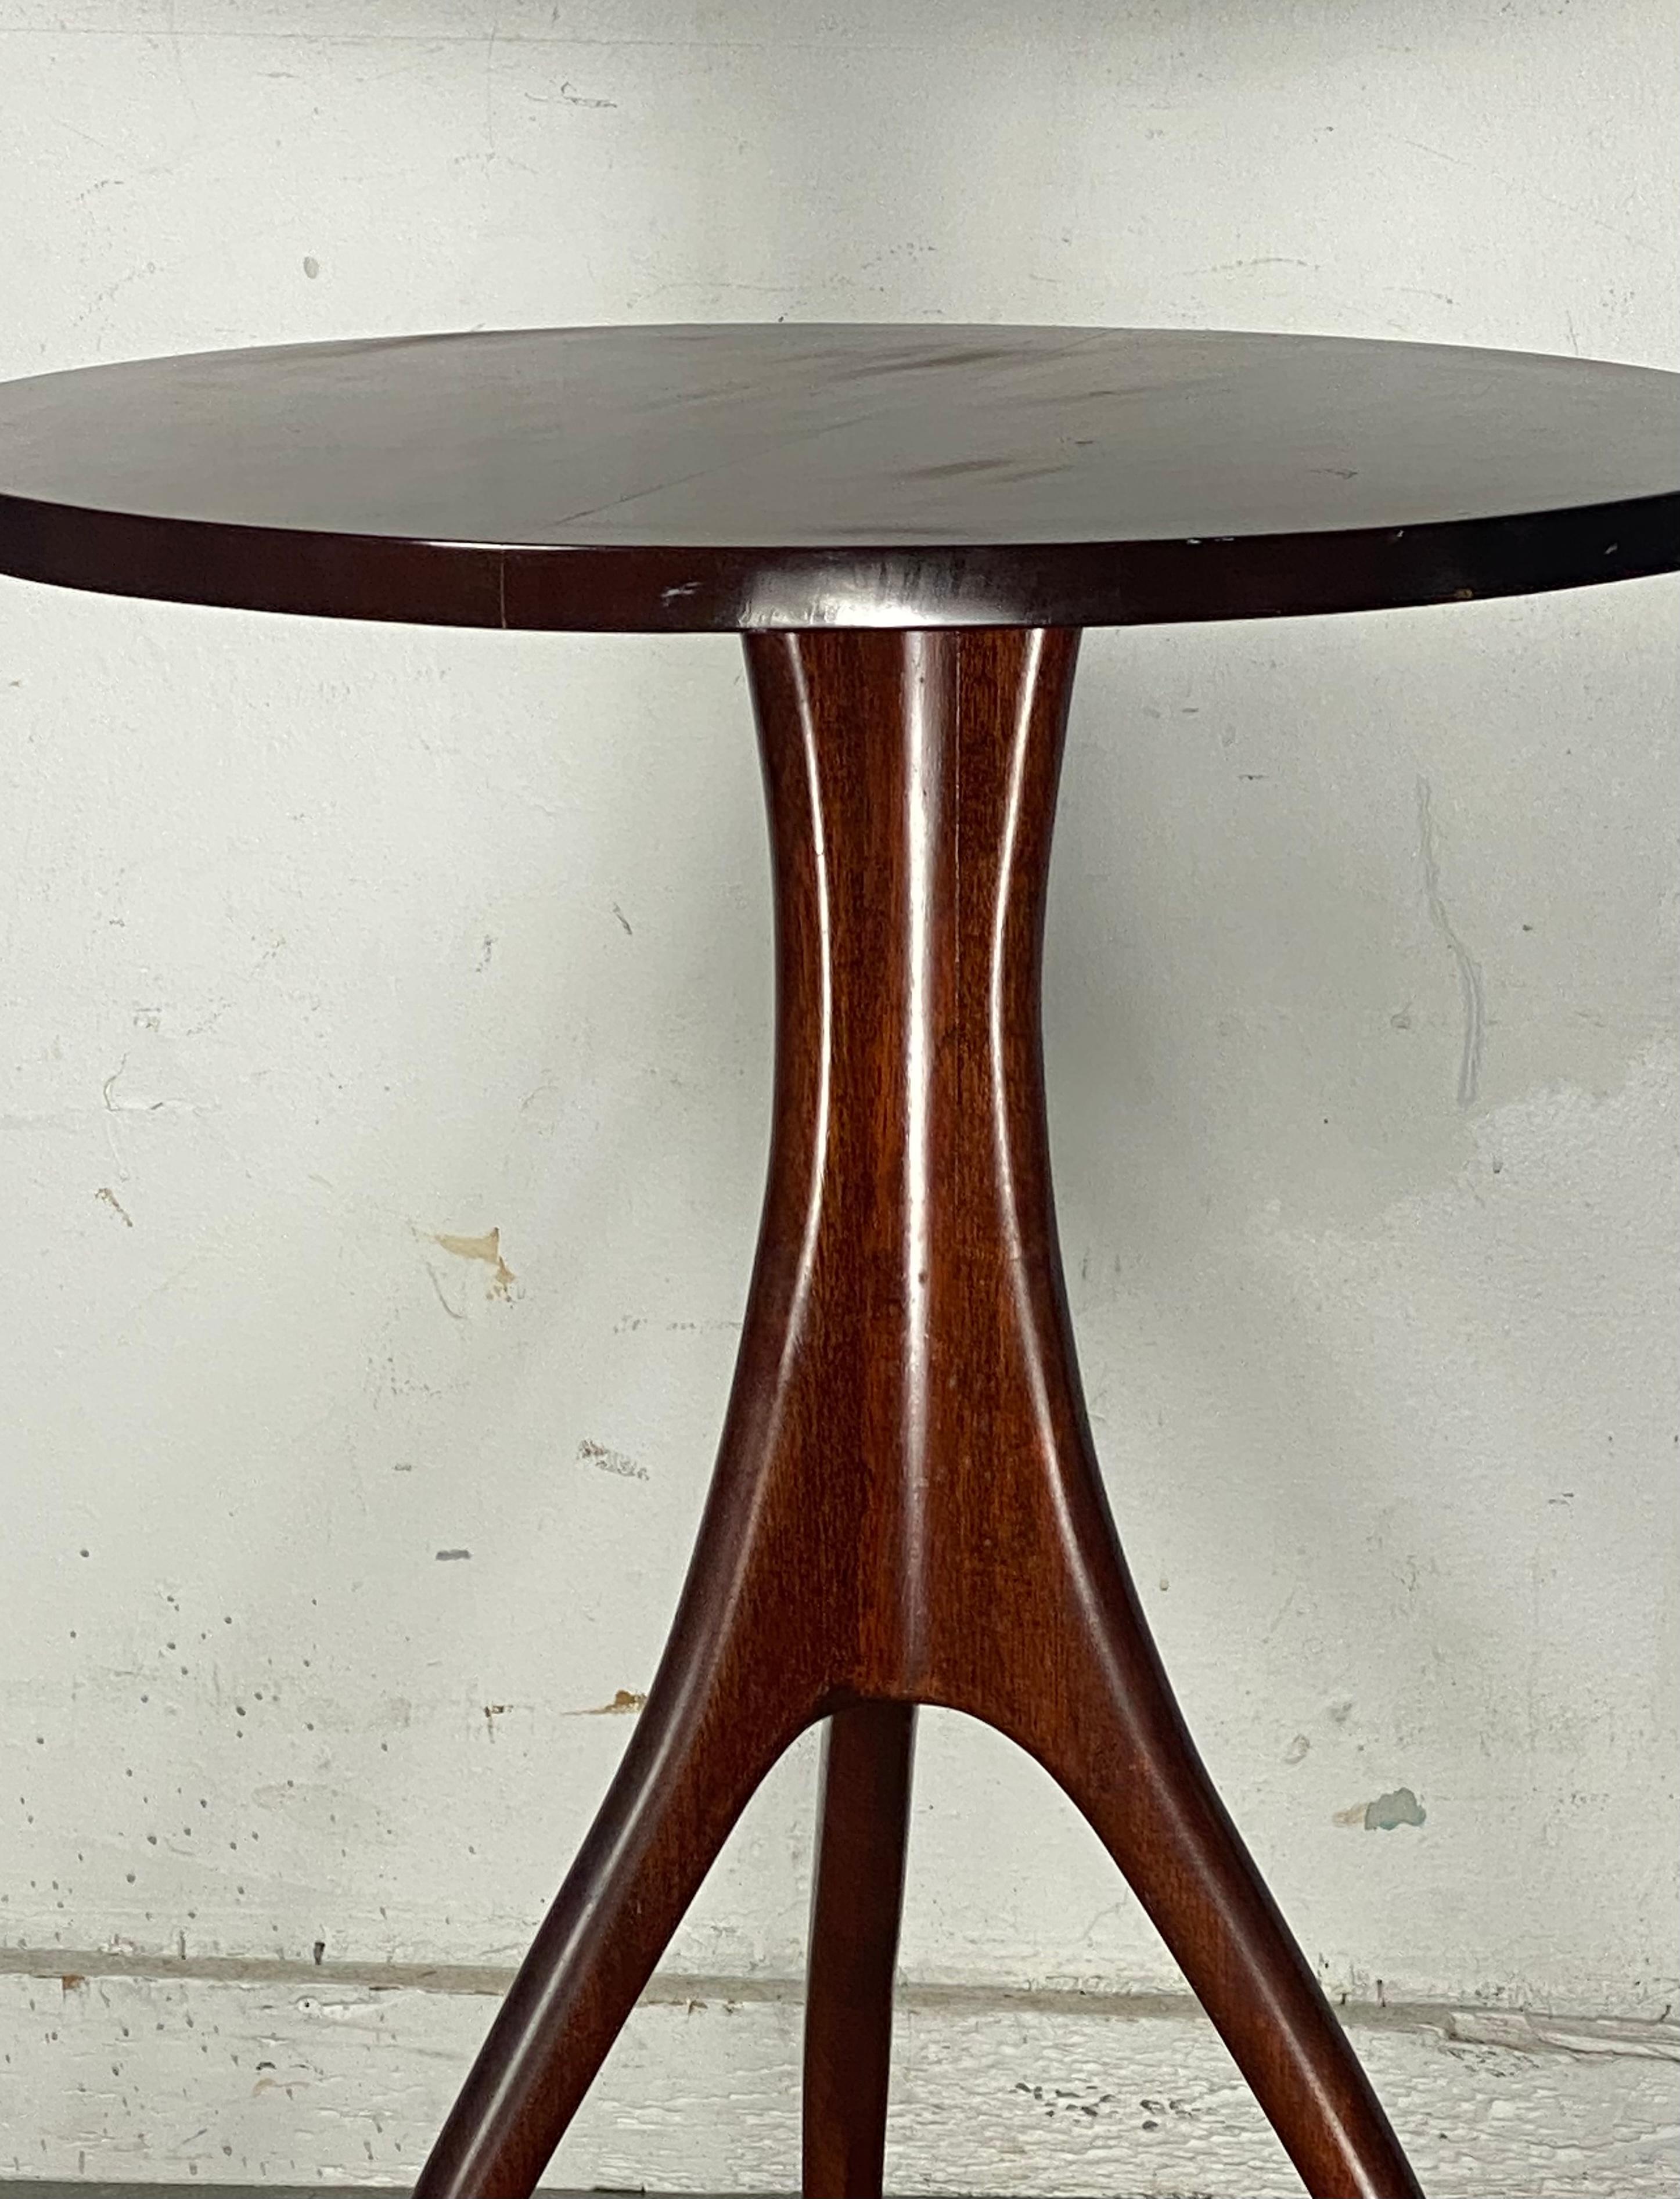 Stunning side /lamp tripod table in mahogany attributed to Edward Wormley for Dunbar. Nice quality and construction. Wonderful style and design. Graceful splayed legs. Retains original finish. Patina. Minor scratch to top (see photo).